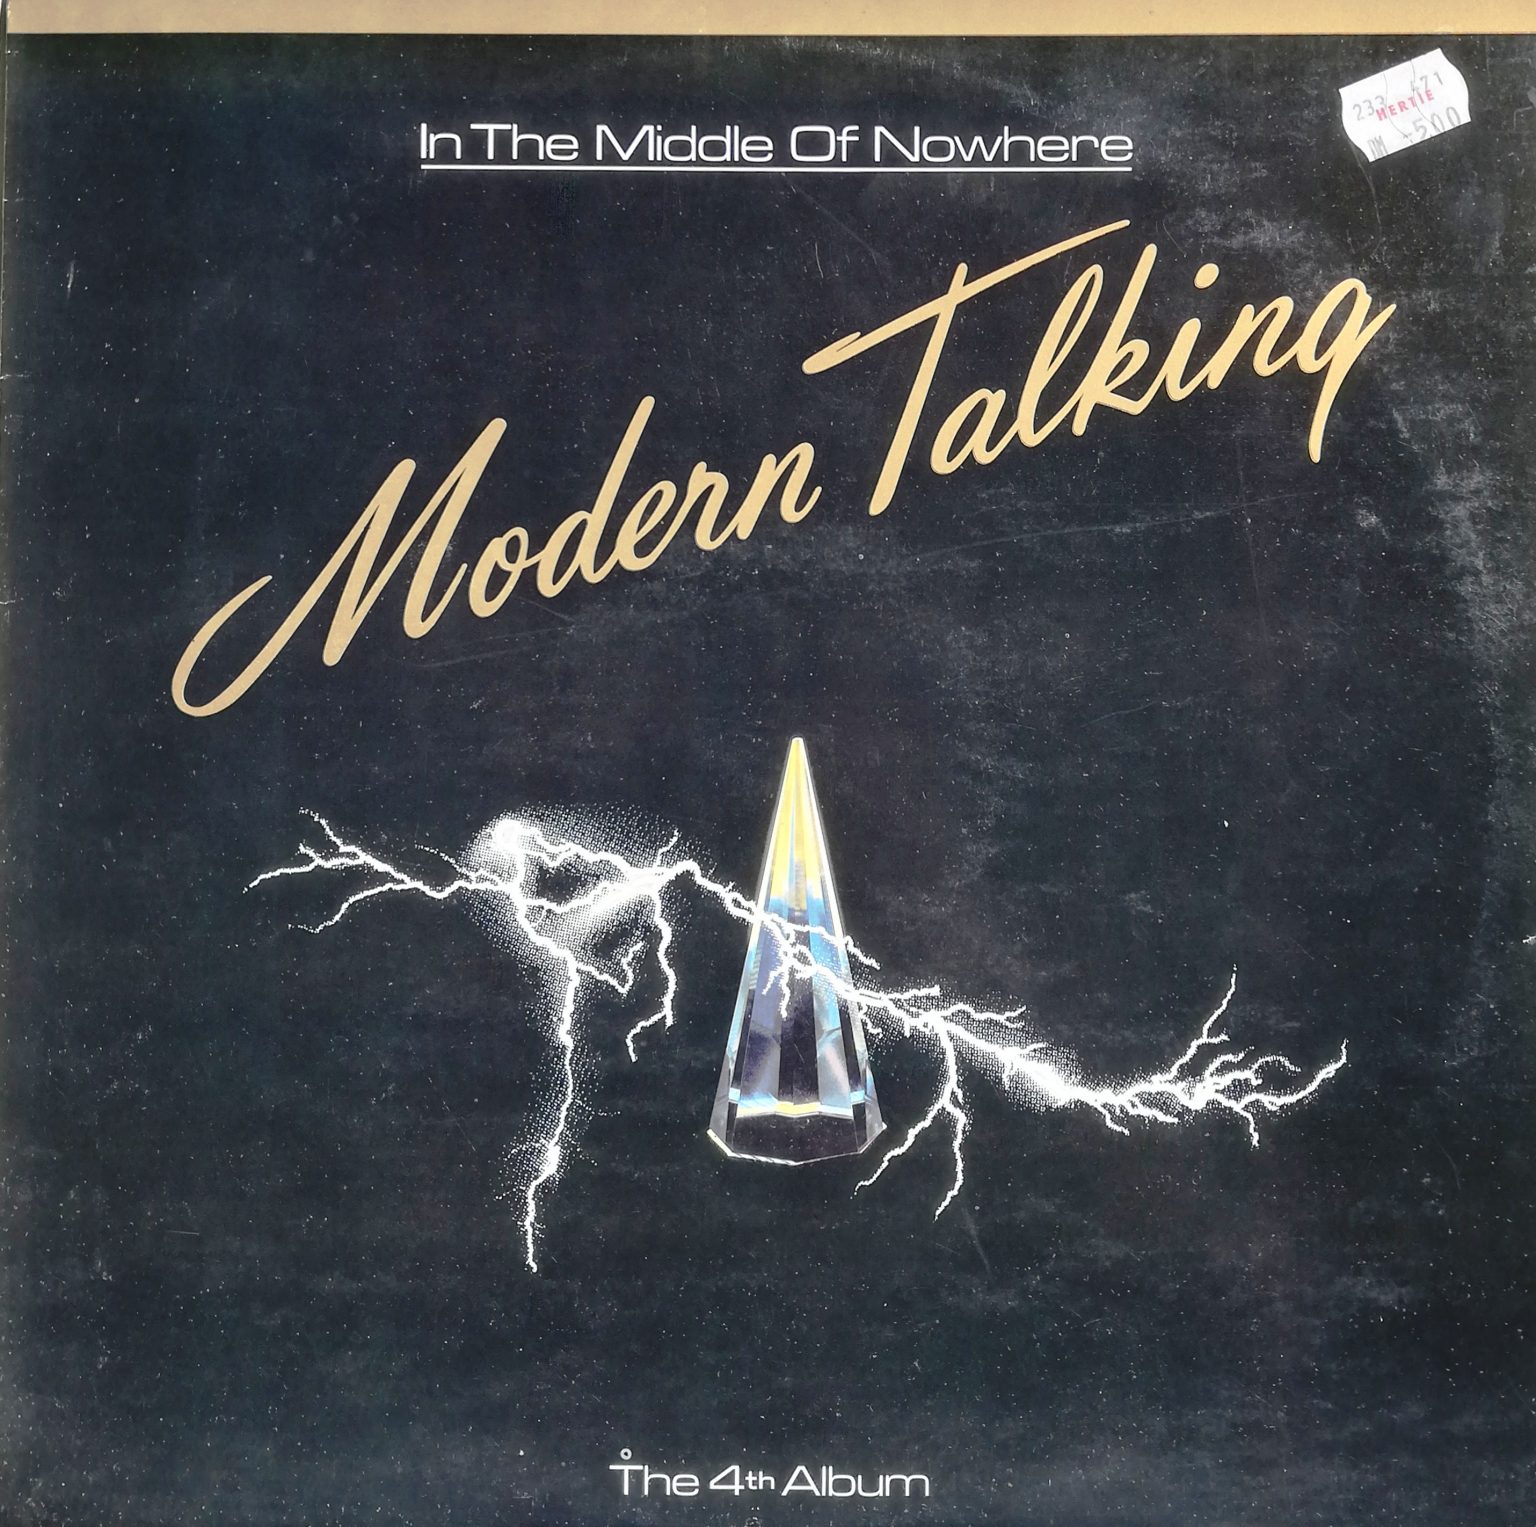 Modern Talking – In the Middle of Nowhere